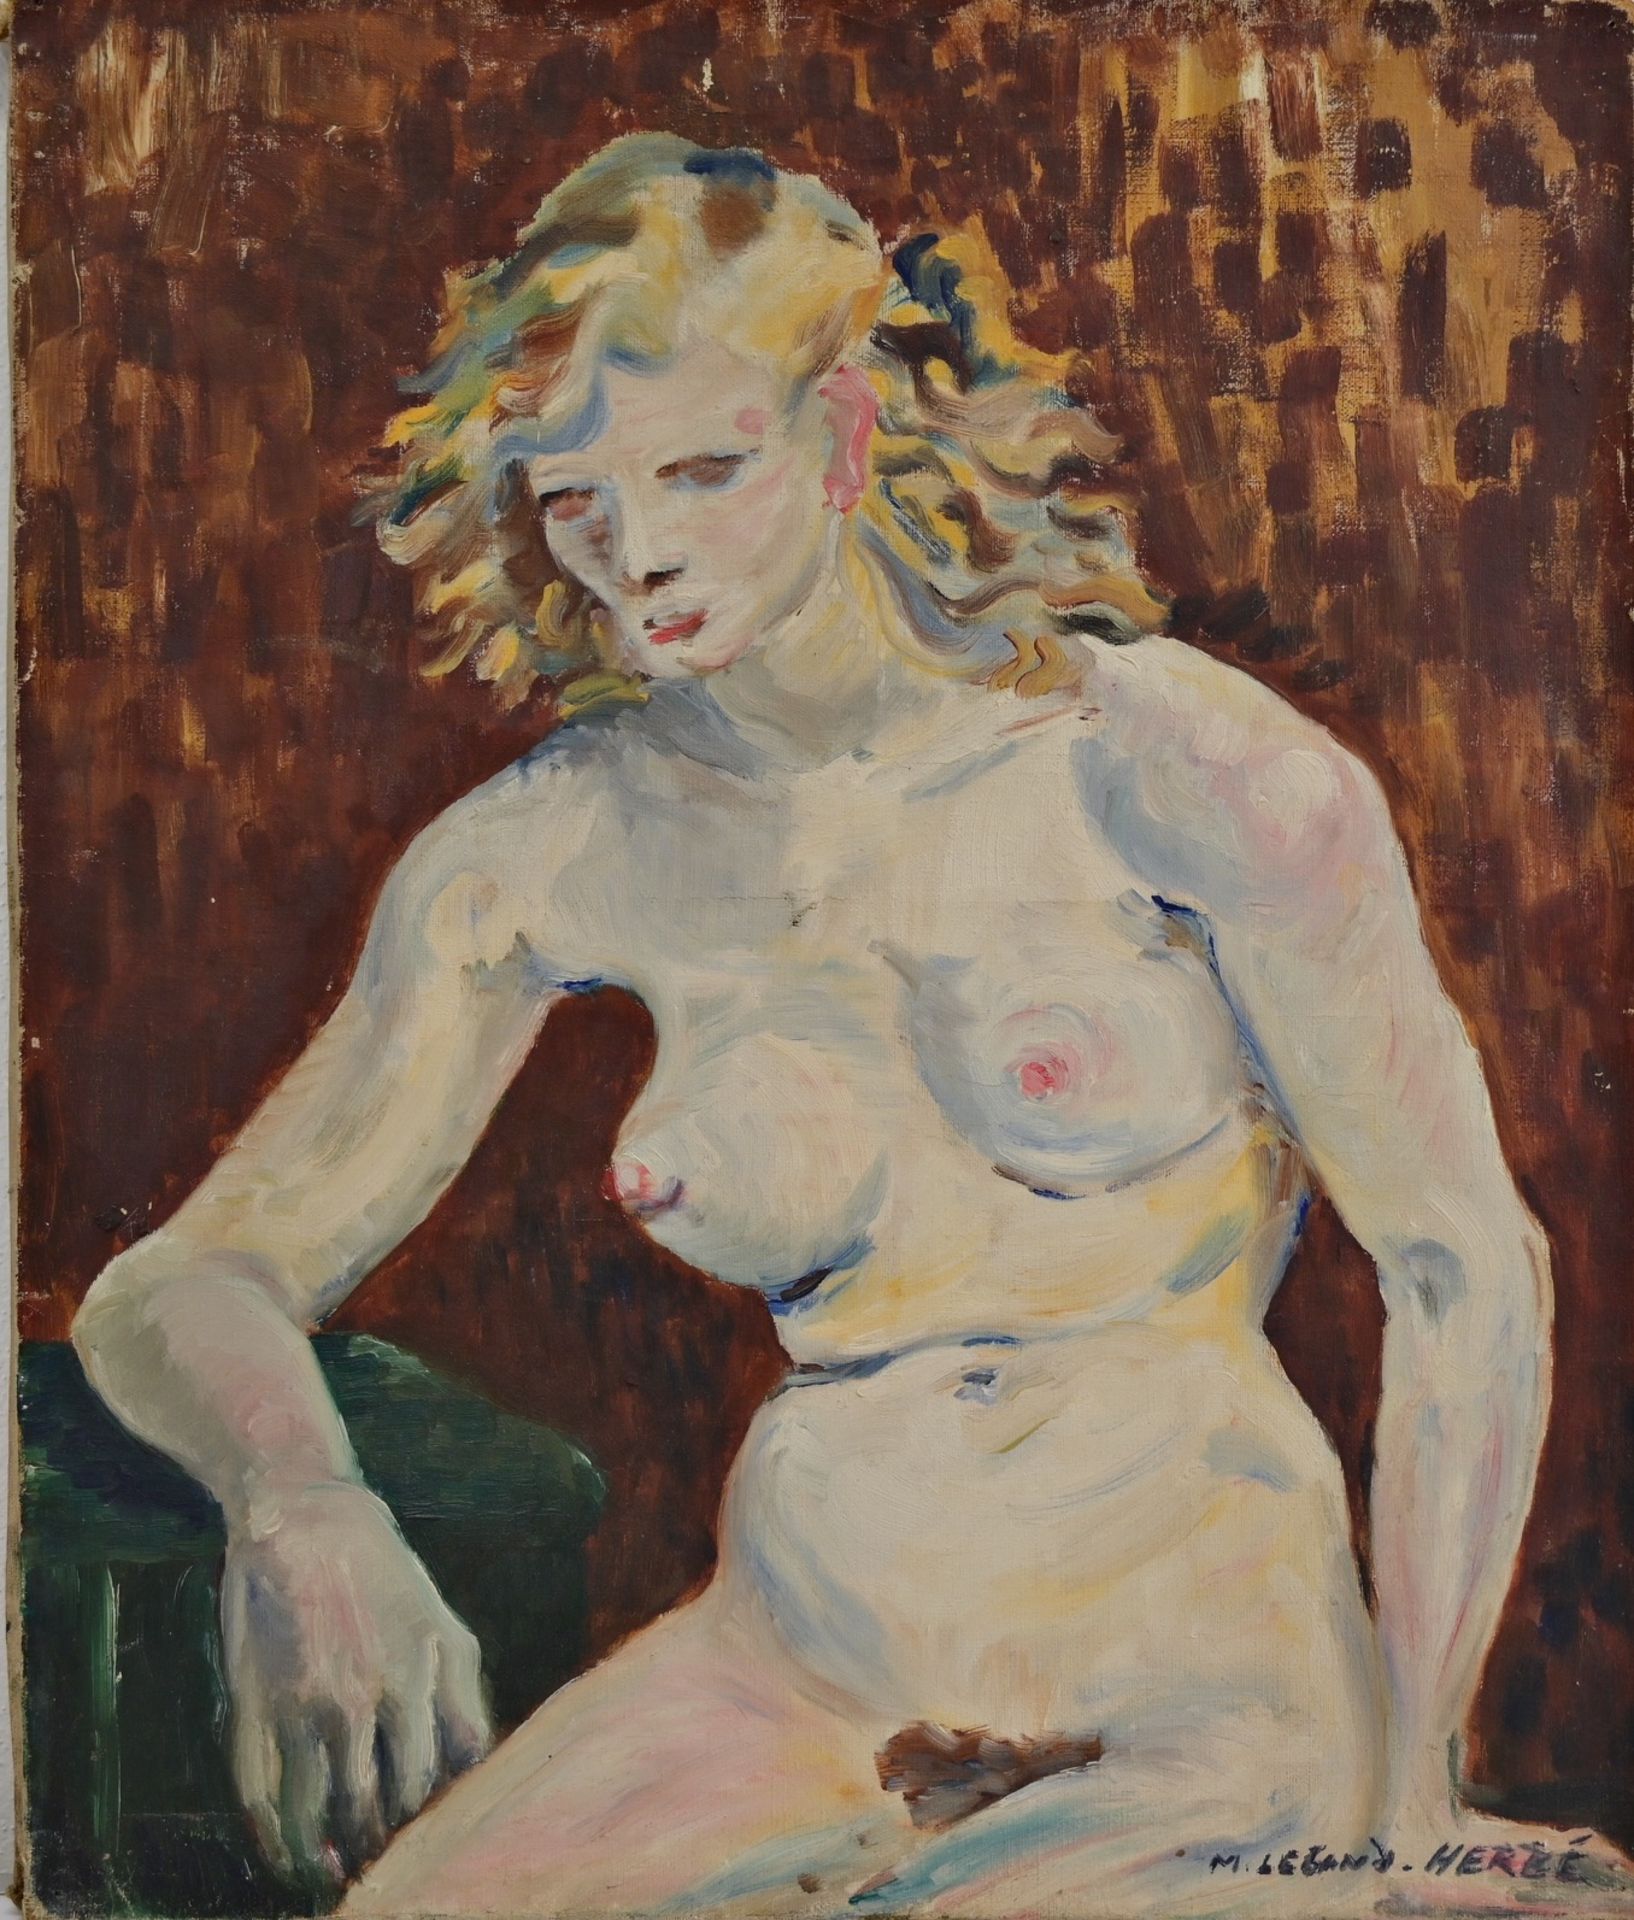 "Seated female nude", oil on canvas, M. Legand Herle, French Painting of the 20th century. - Bild 2 aus 5